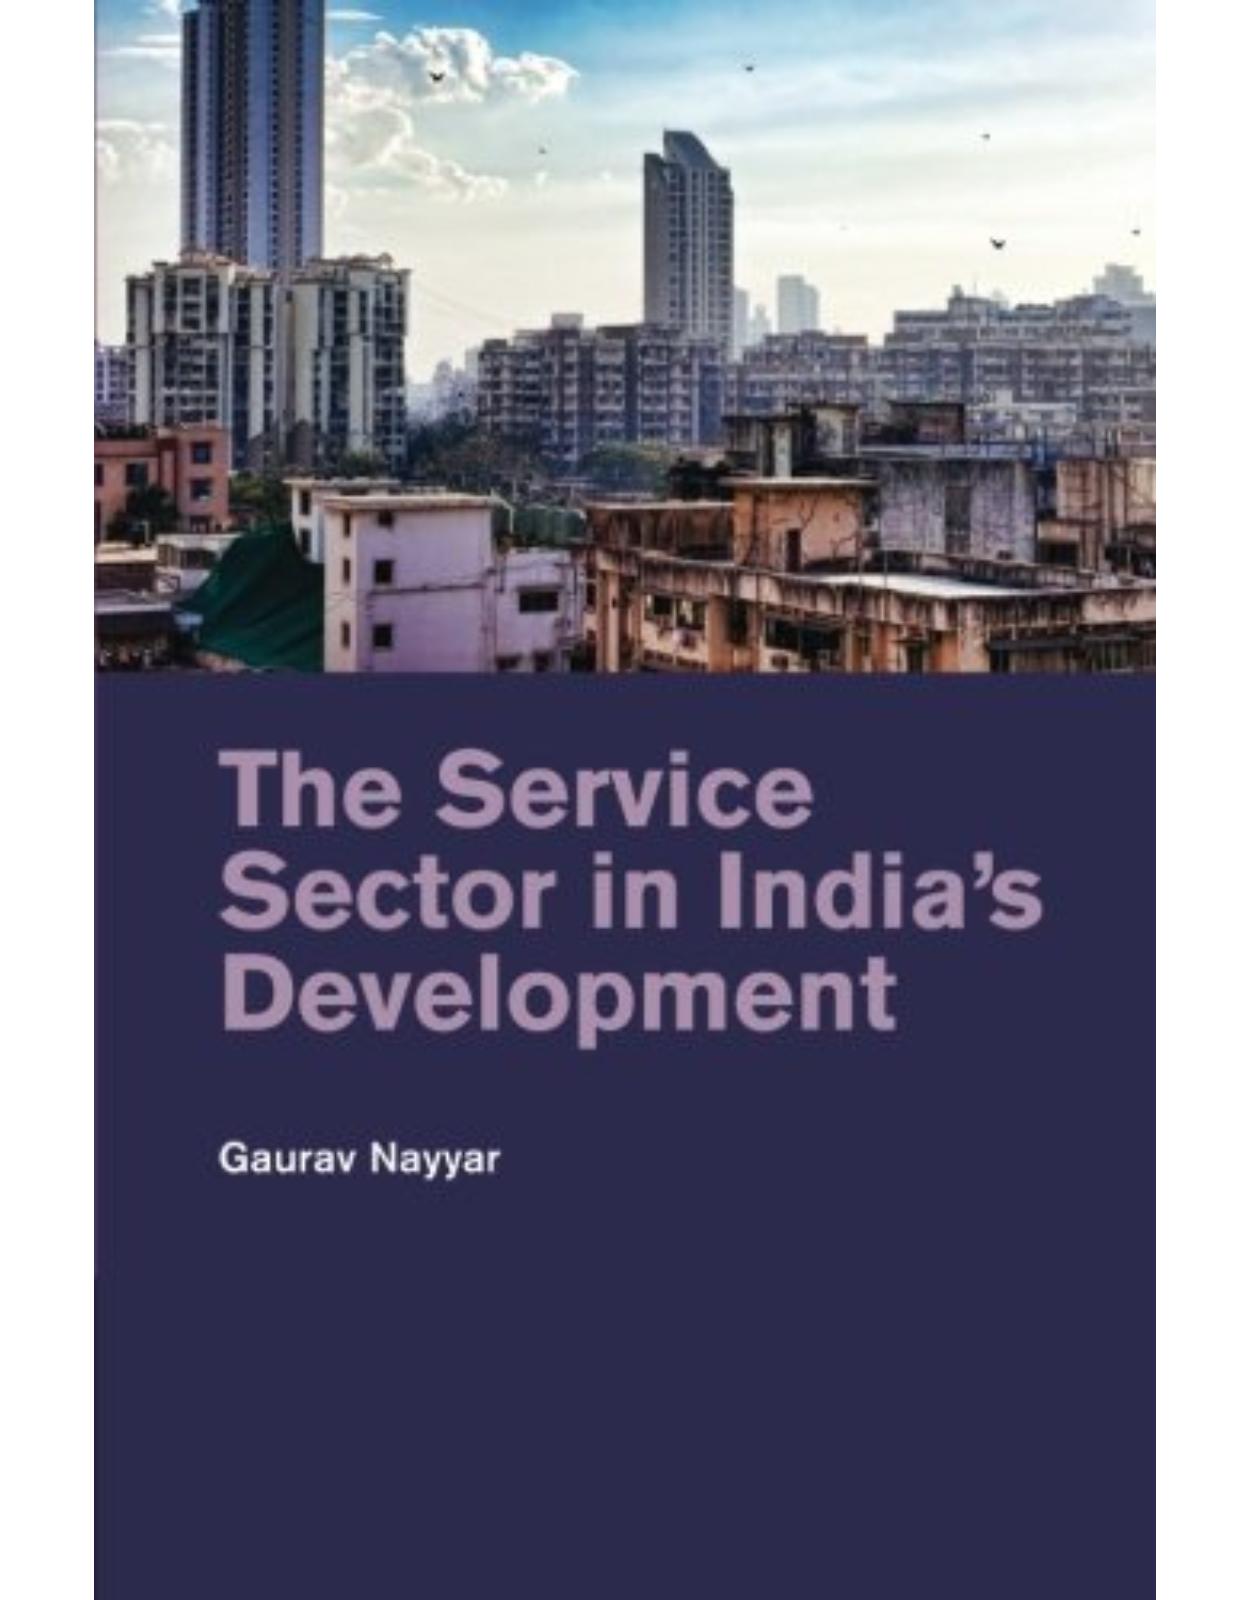 The Service Sector in IndiaÂ’s Development